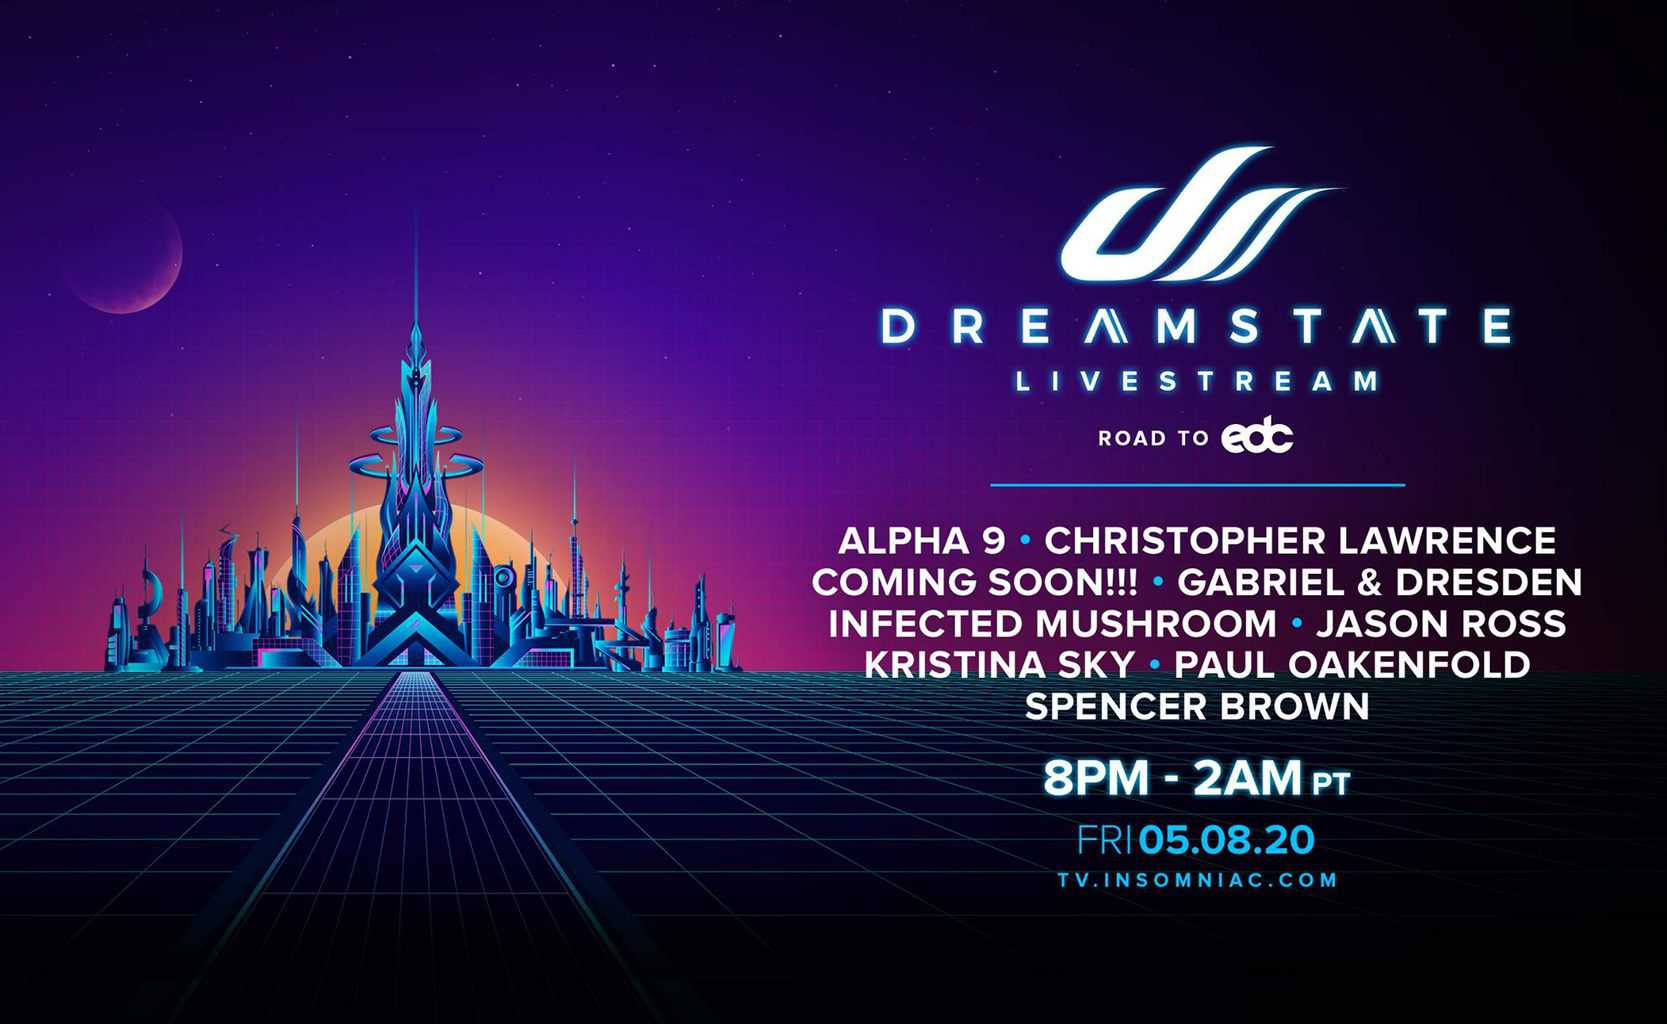 Dreamstate Live Stream Lineup is Finally Revealed